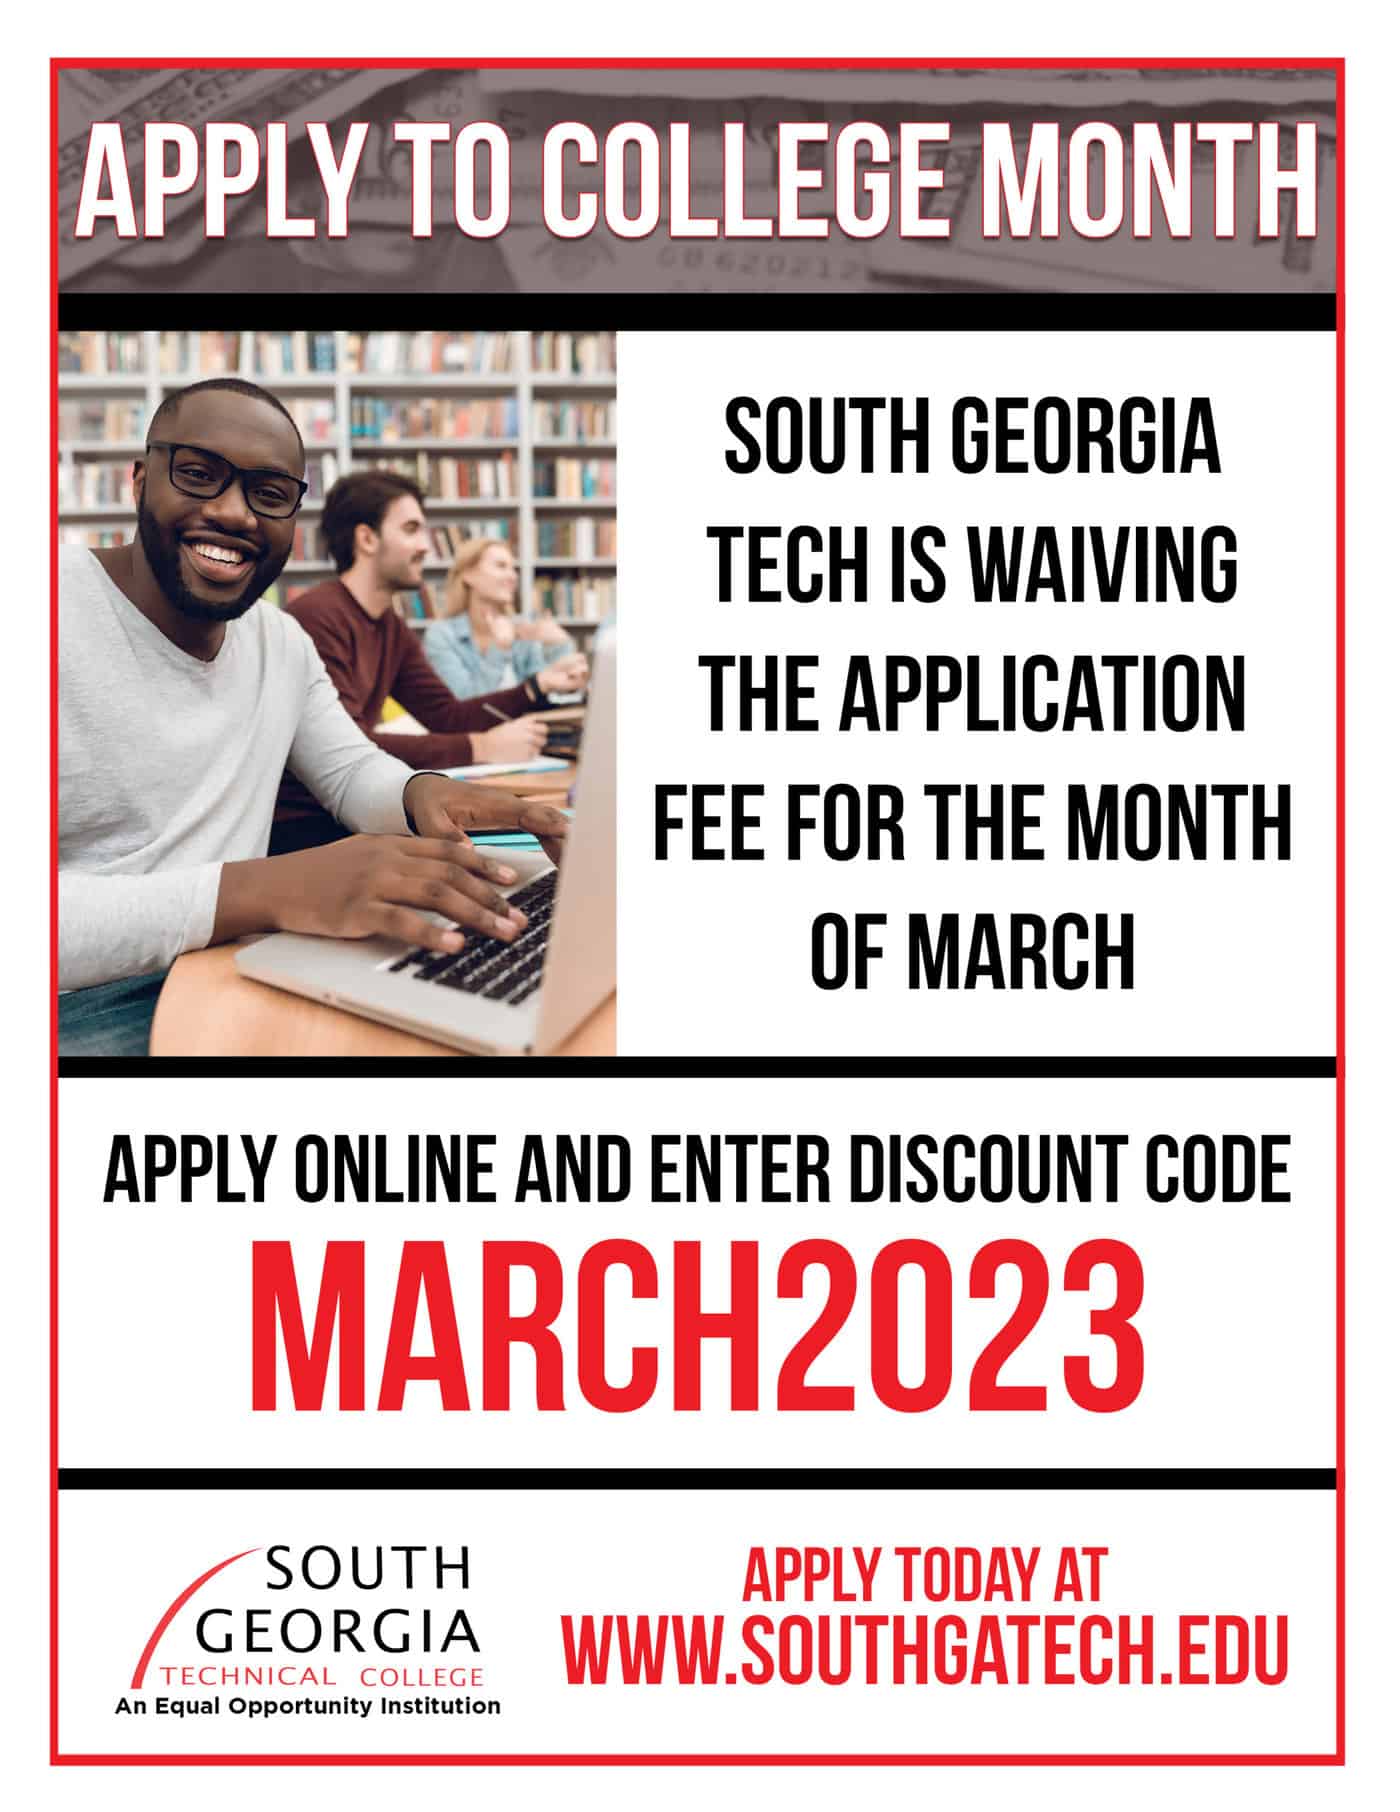 SGTC waiving application fees during March. Apply Now!